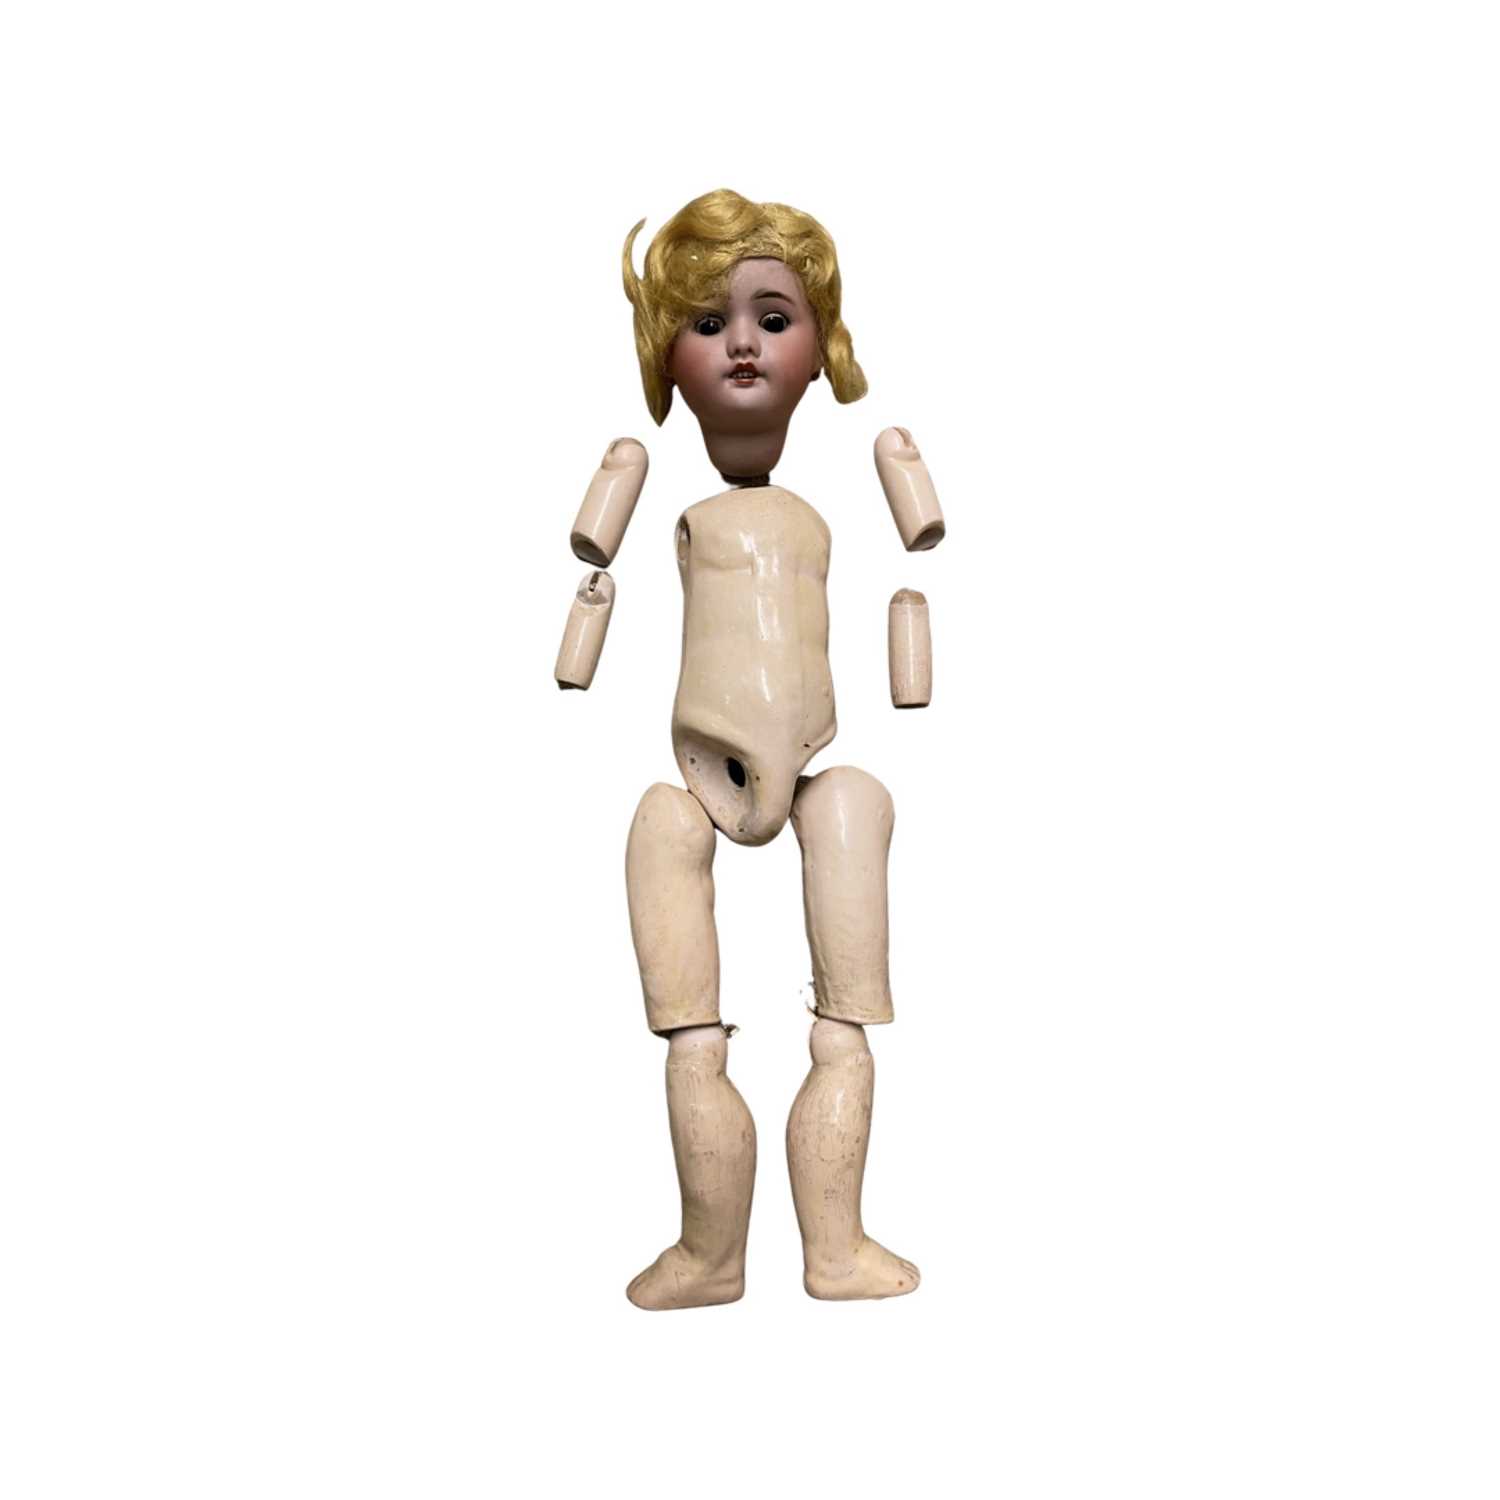 SFBJ bisque head doll for restringing. Black eyes, blonde hair, lacking elbow joints. Marked to back